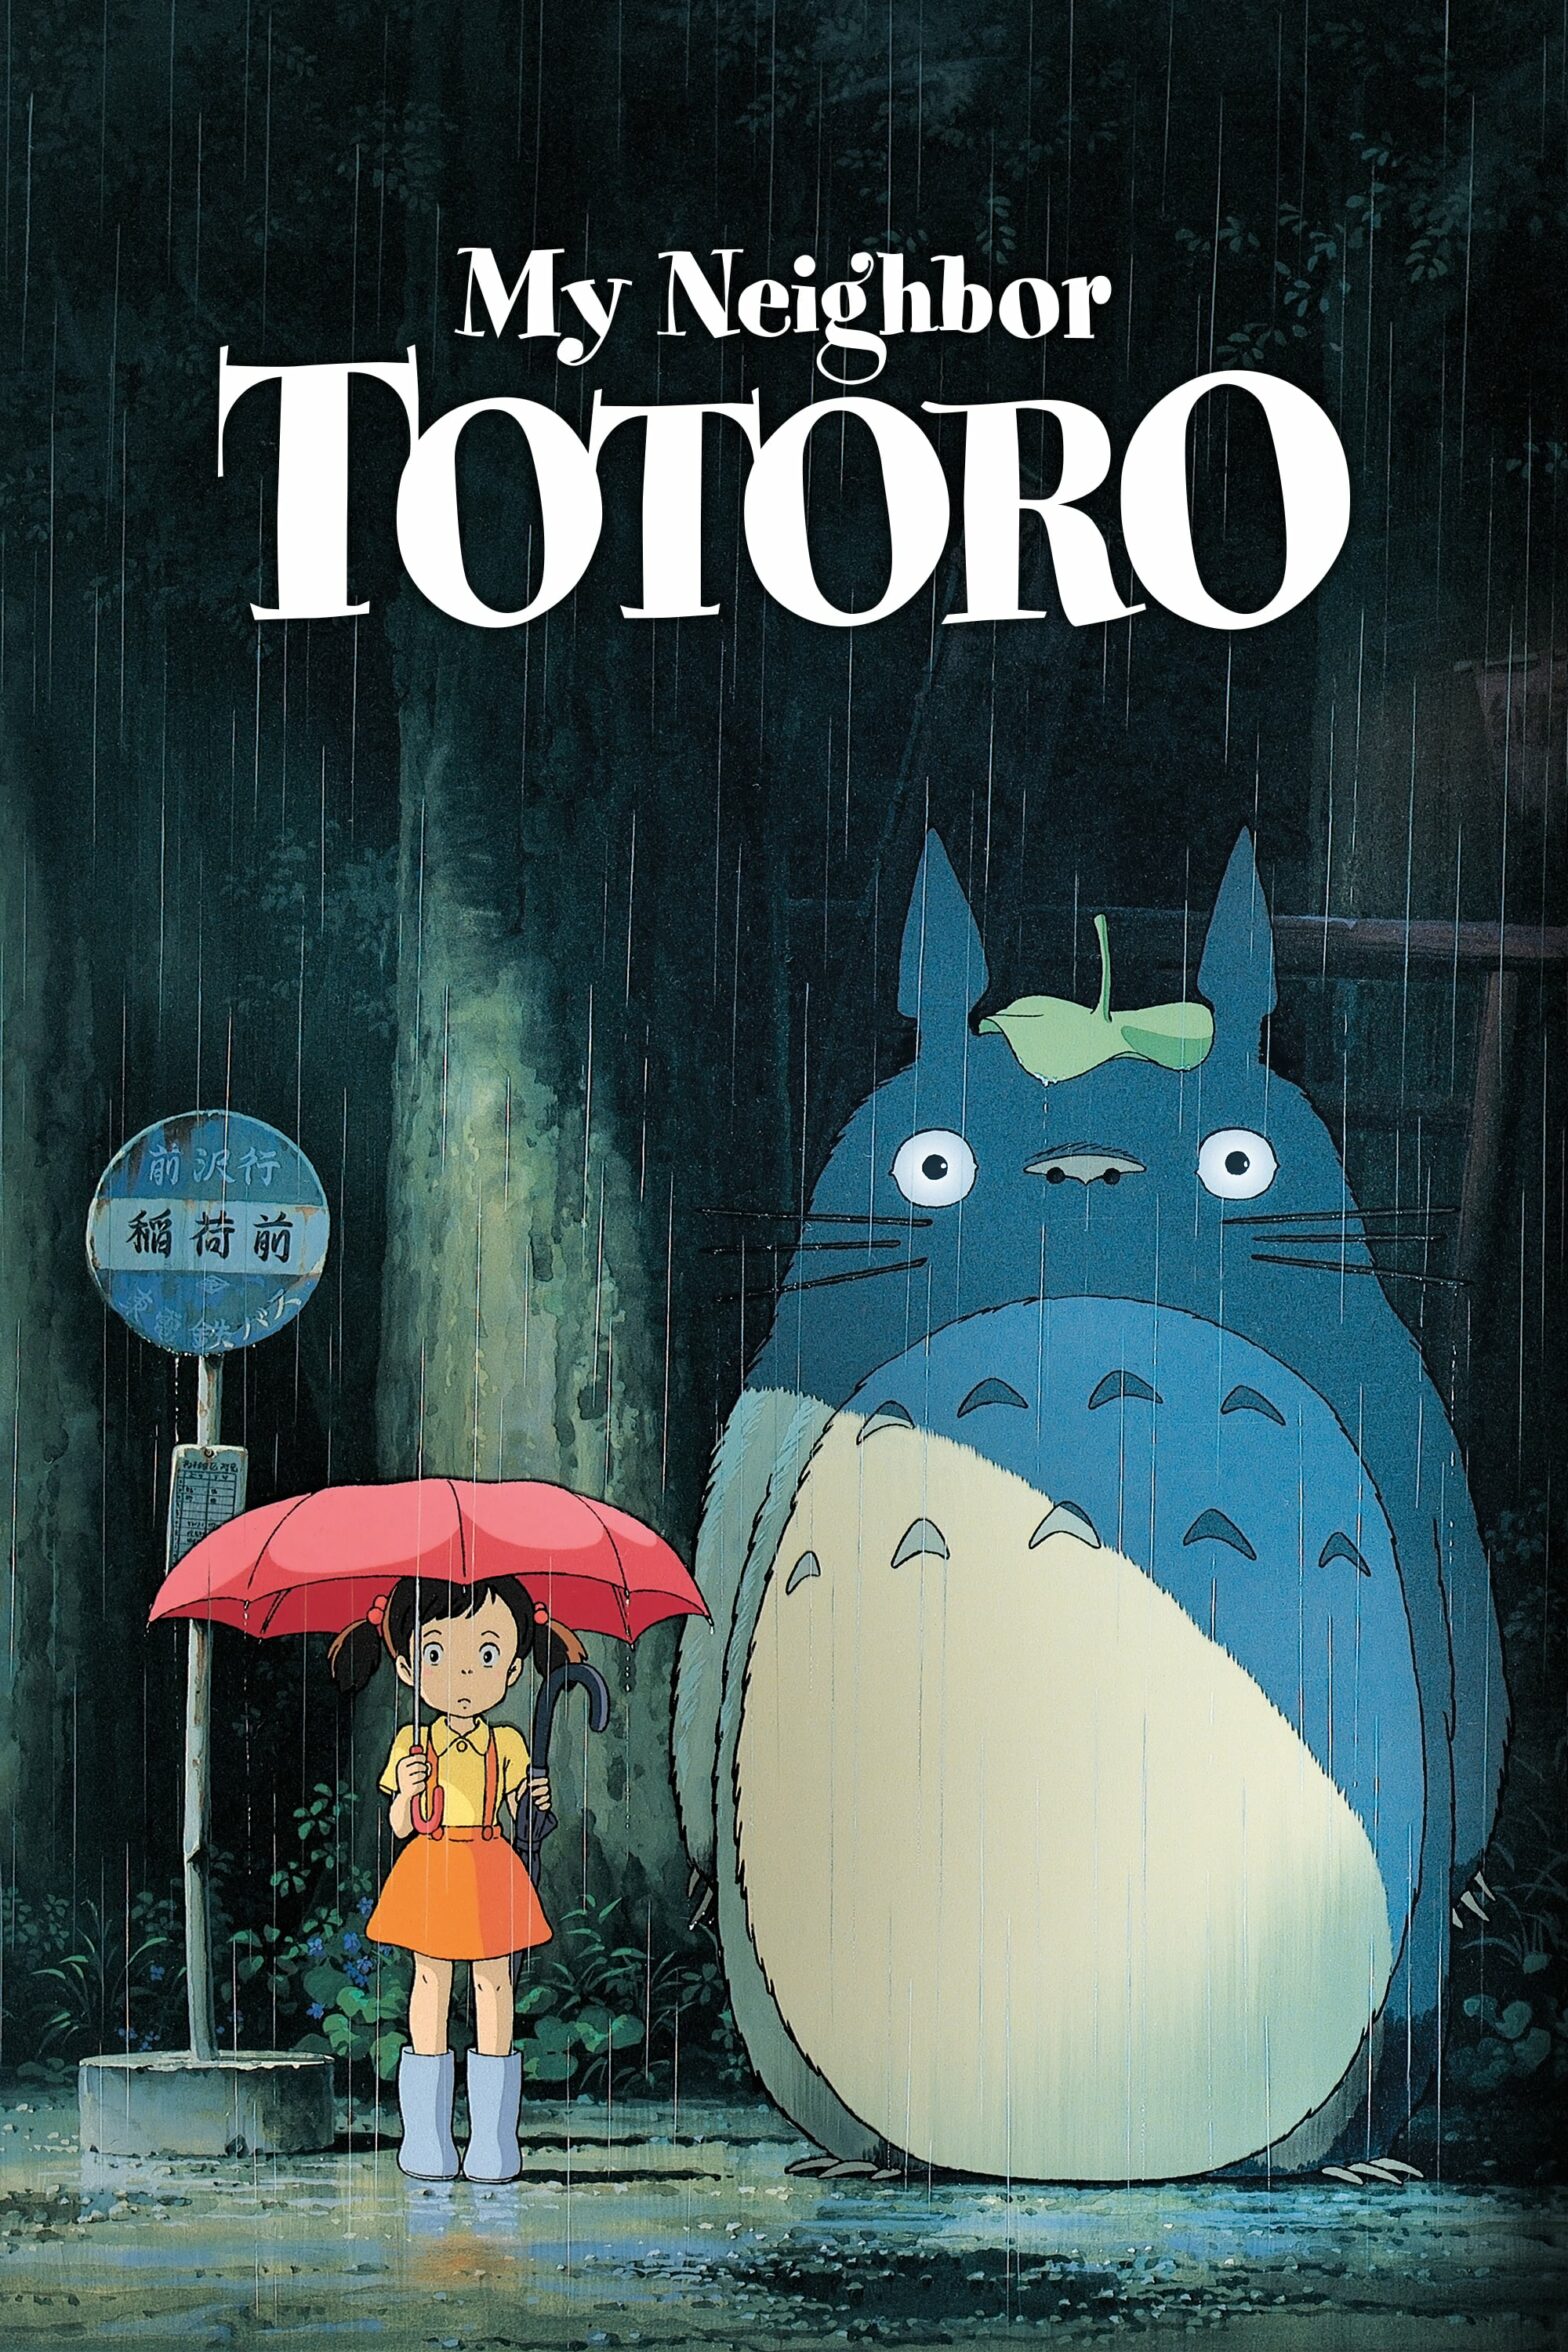 Poster for the movie "My Neighbor Totoro"